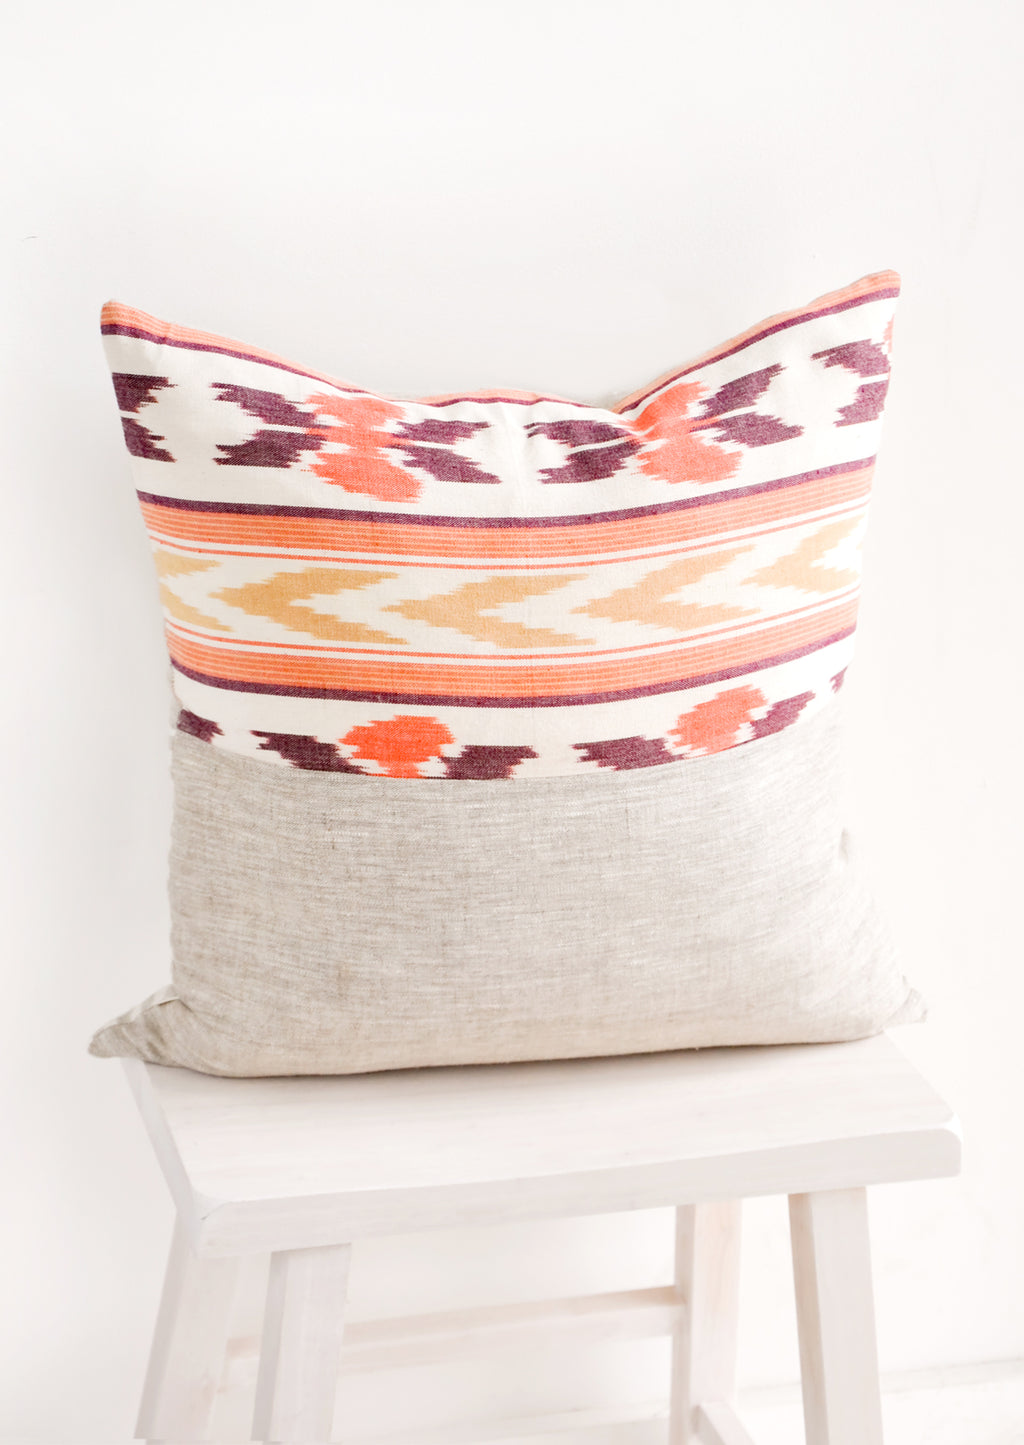 1: Square throw pillow in mixed fabrics. Top half is ikat print in orange and red, bottom half is plain linen.